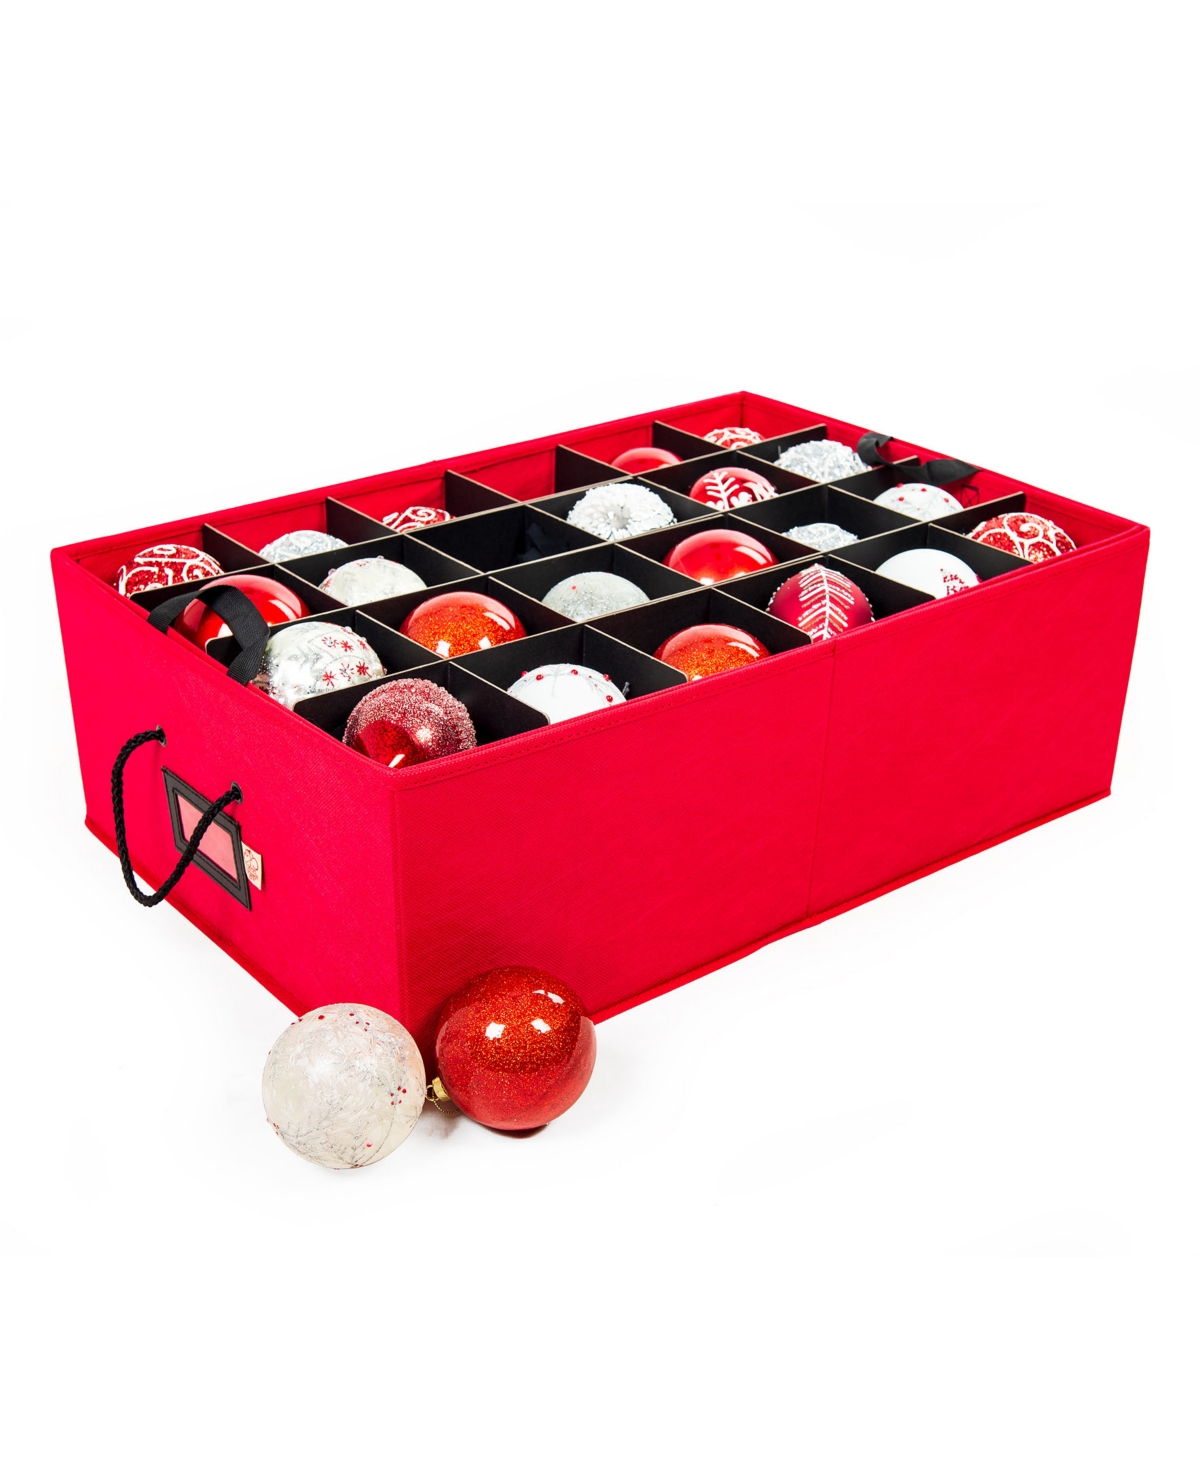 2 Tray Christmas Ornament Storage Box with Dividers - Red